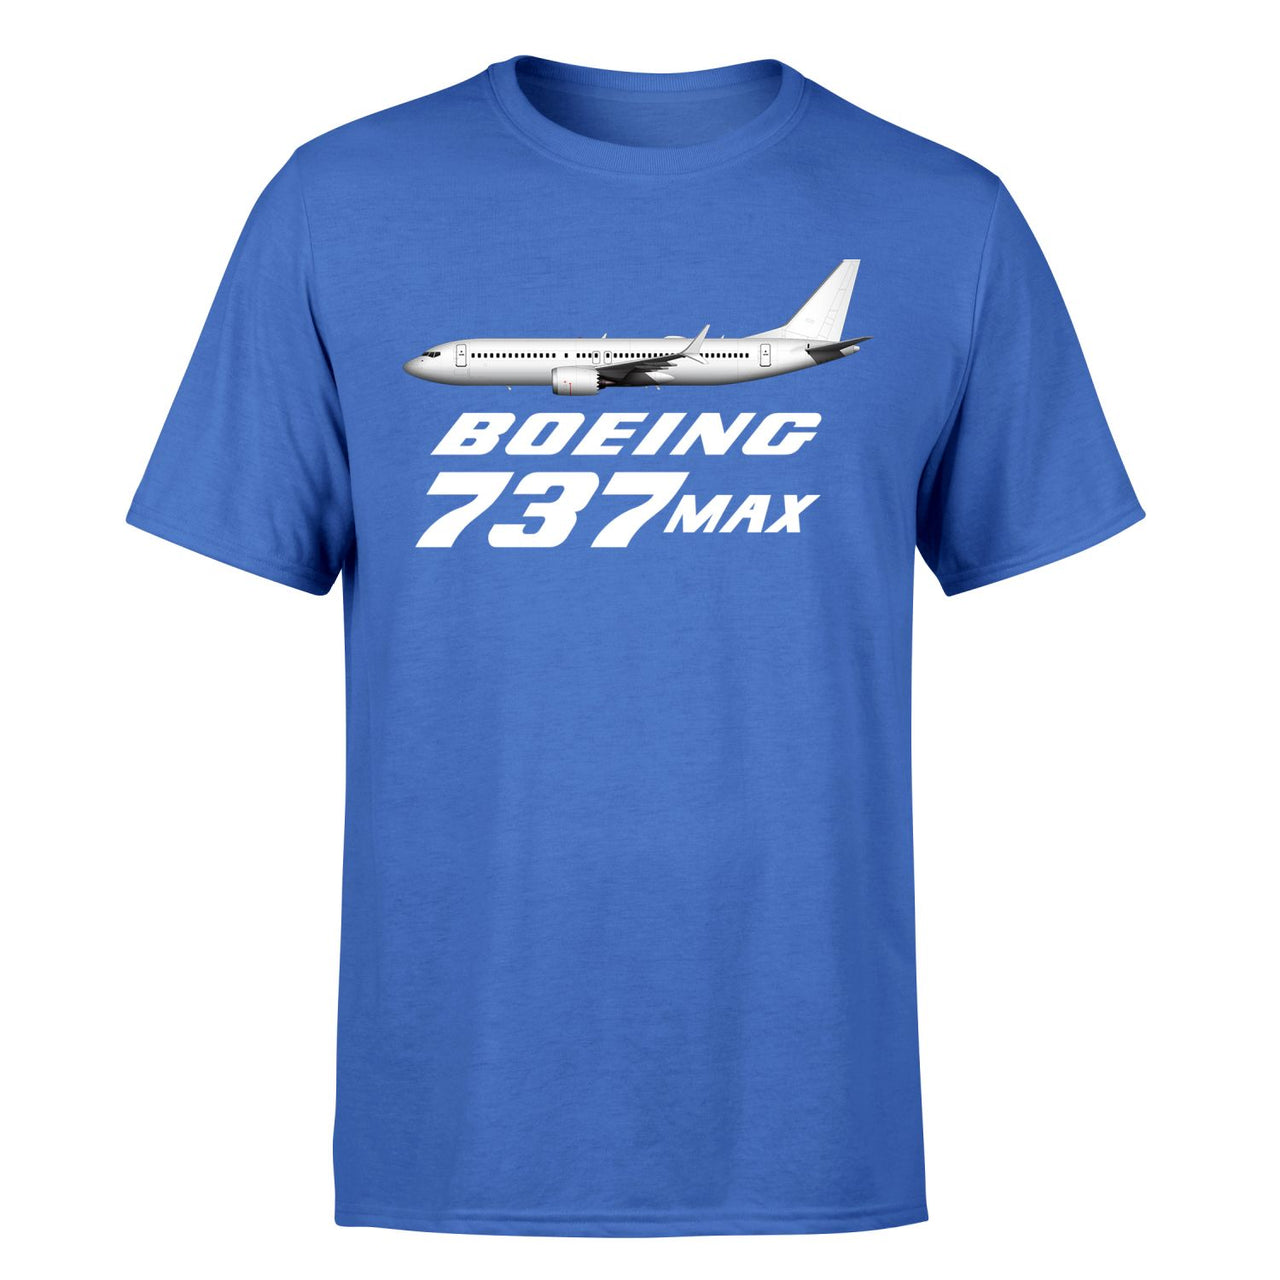 The Boeing 737Max Designed T-Shirts